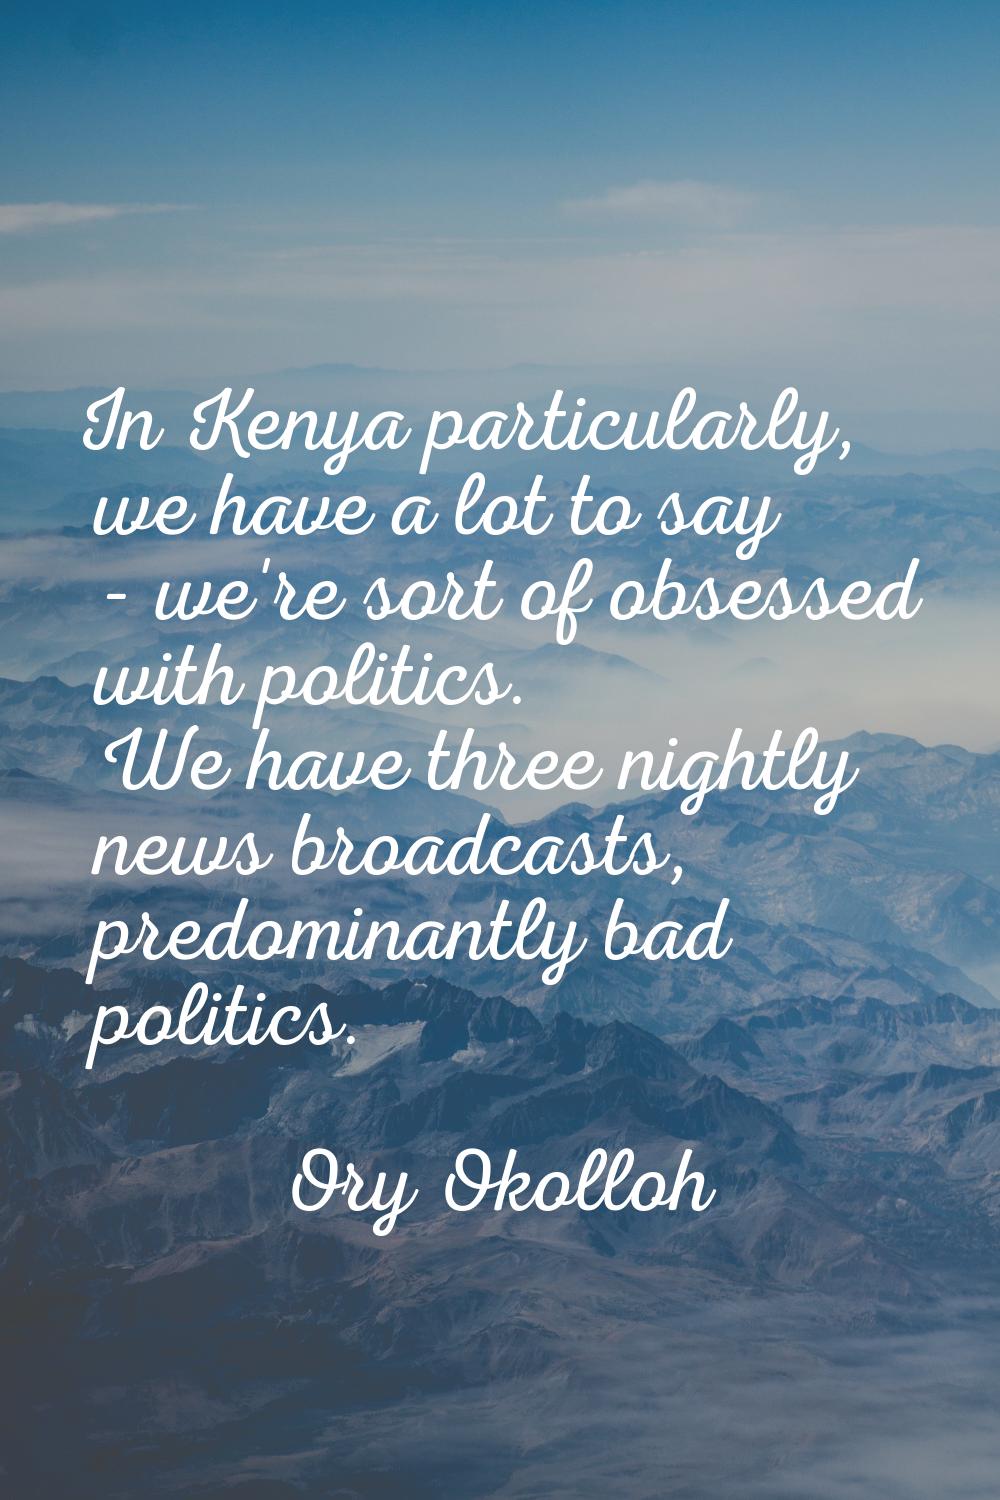 In Kenya particularly, we have a lot to say - we're sort of obsessed with politics. We have three n